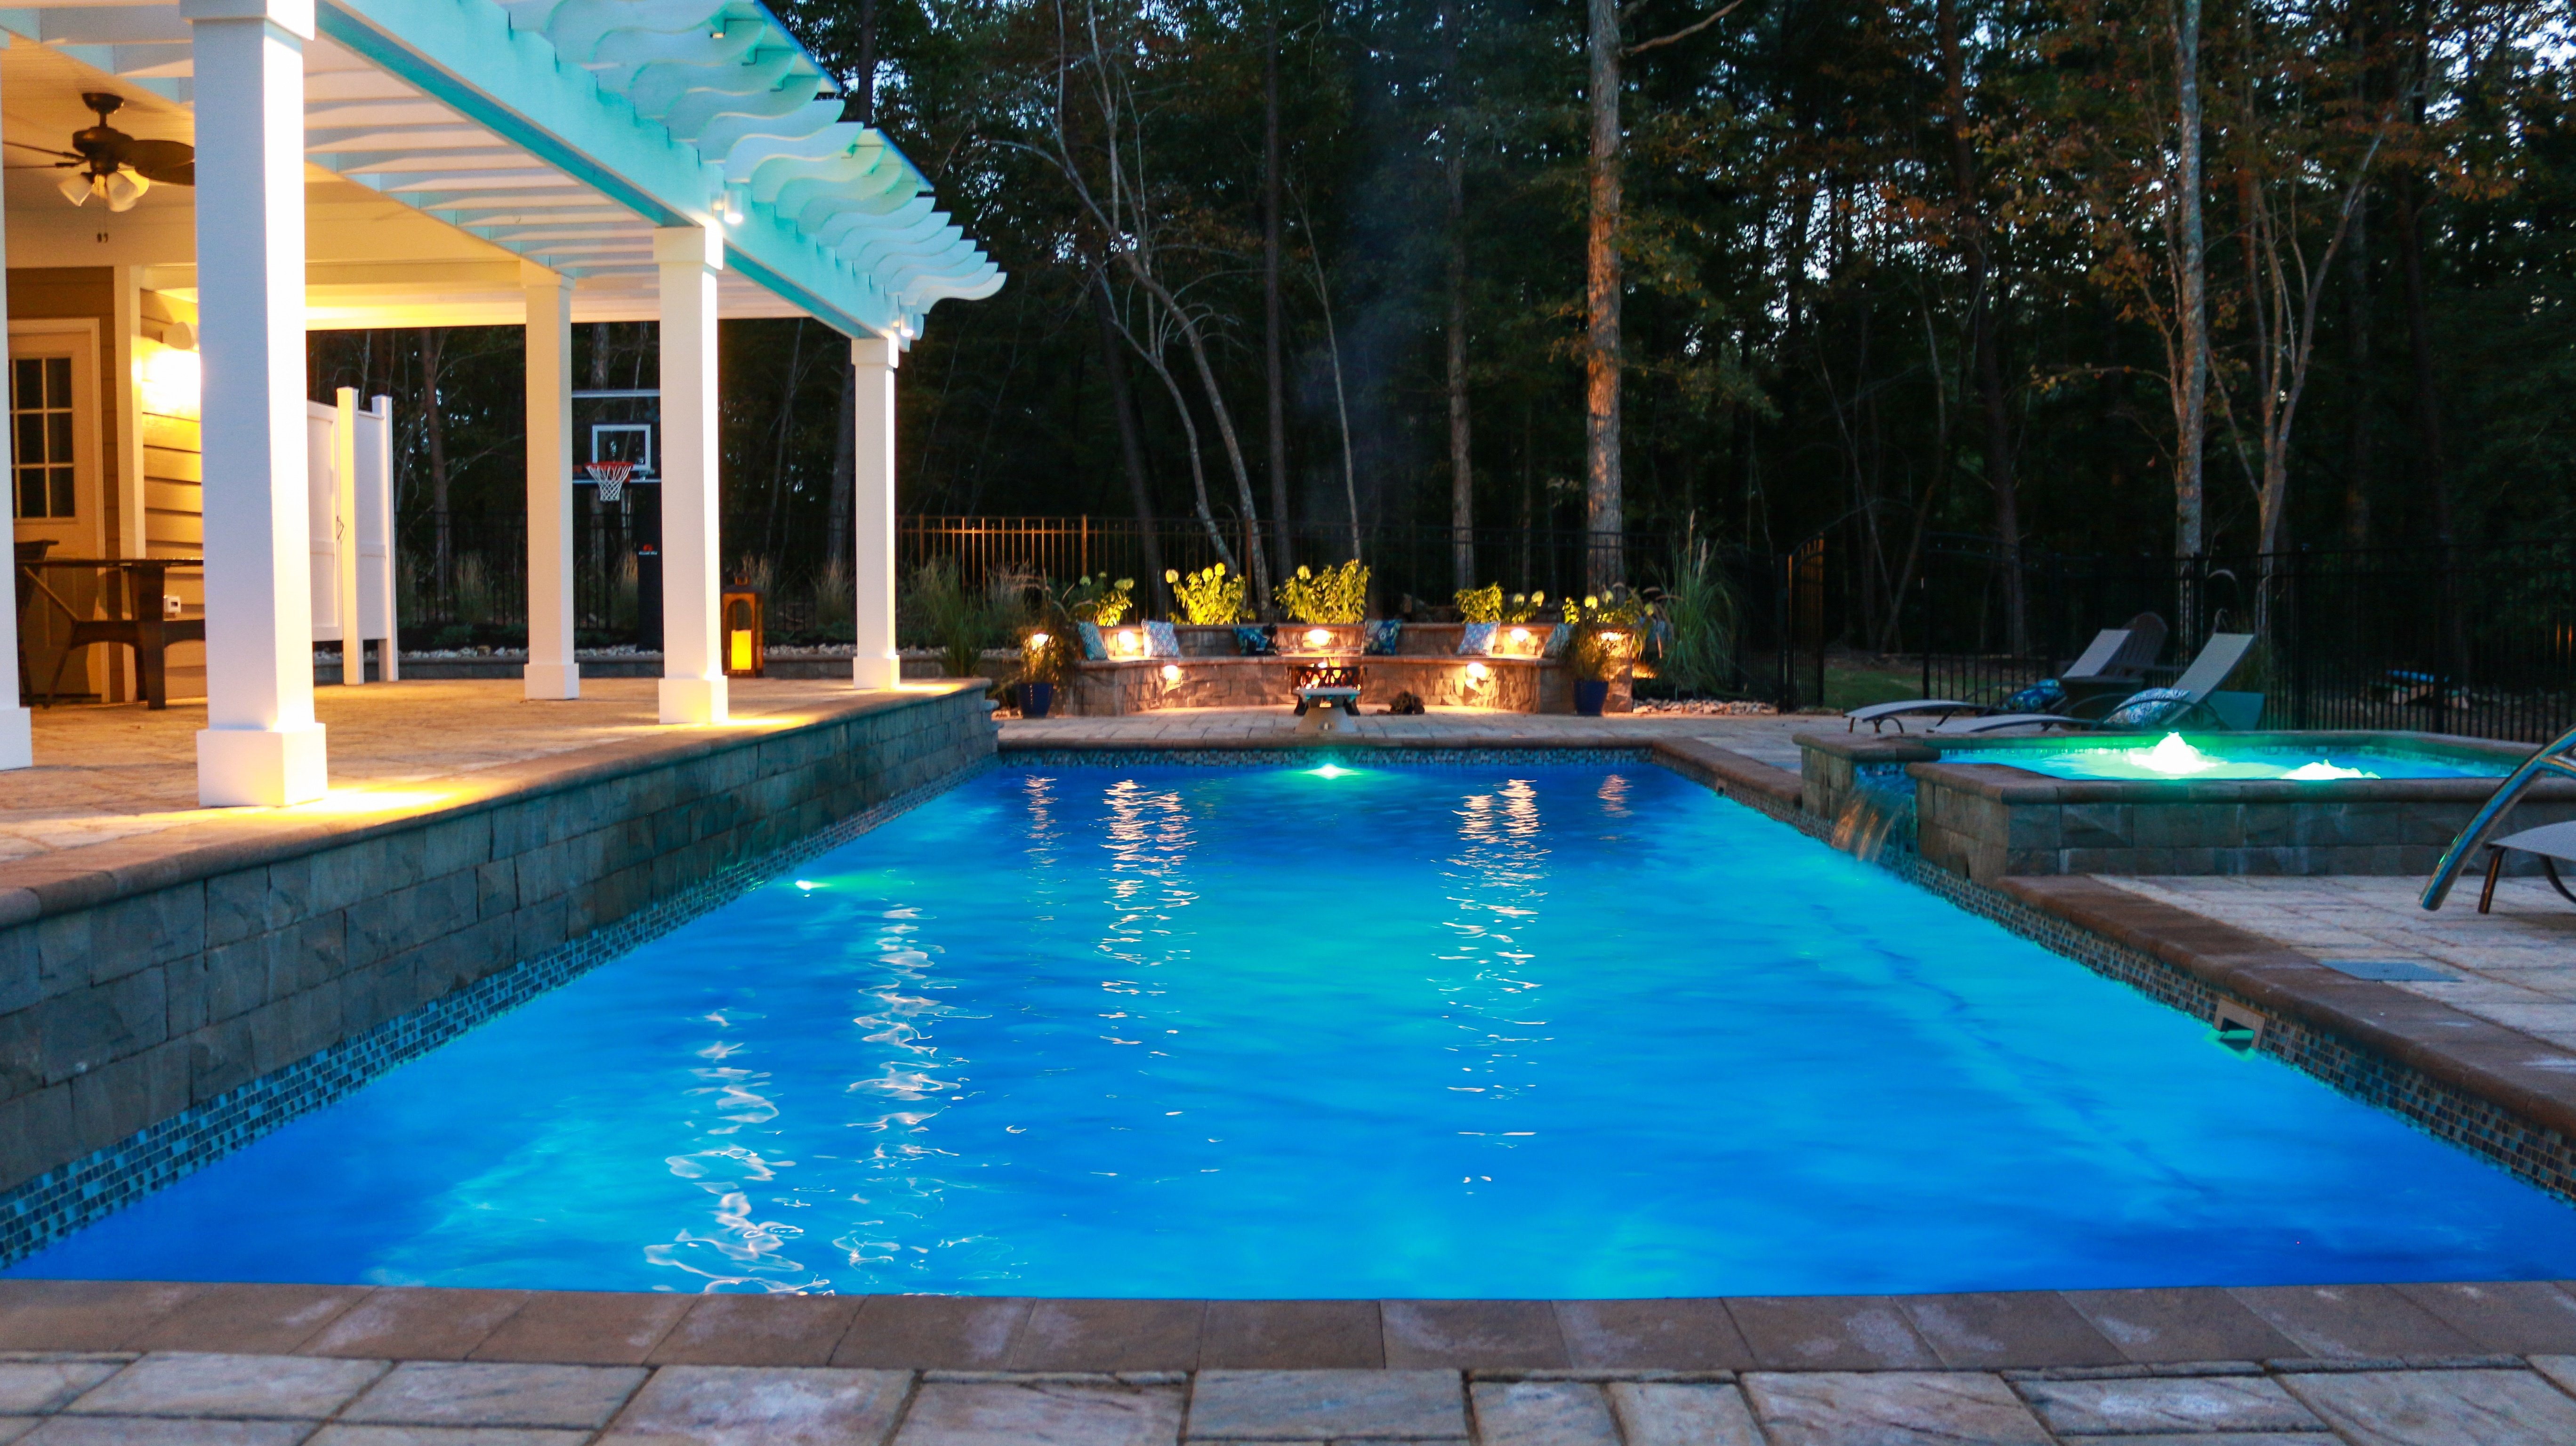 40 pool in maya blue color at night with pool lights and a tanning ledge with a spillway and bubblers